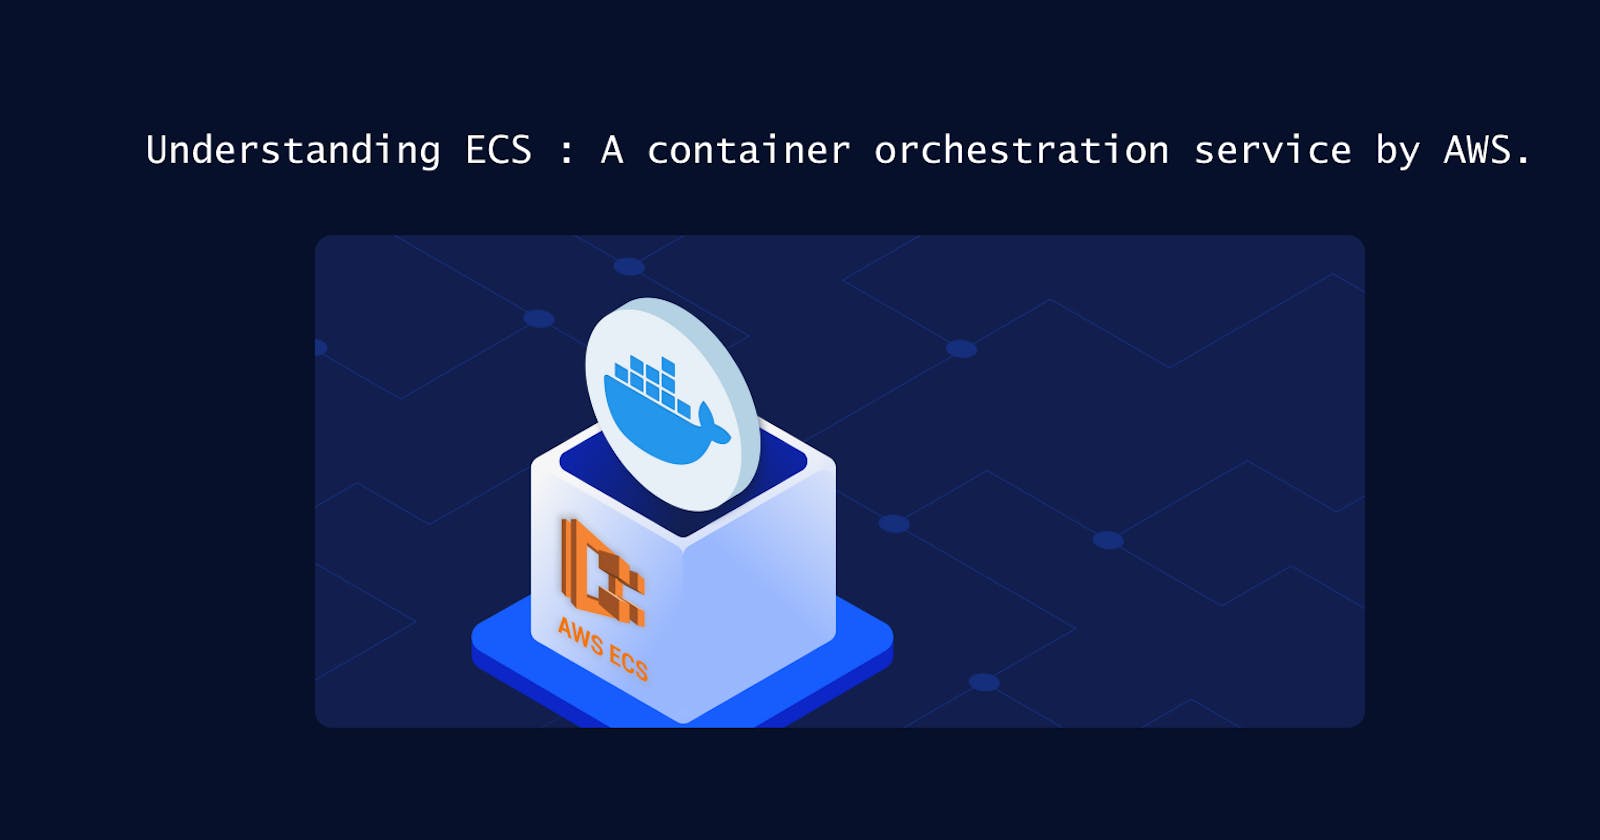 Understanding ECS : A container orchestration service by AWS.